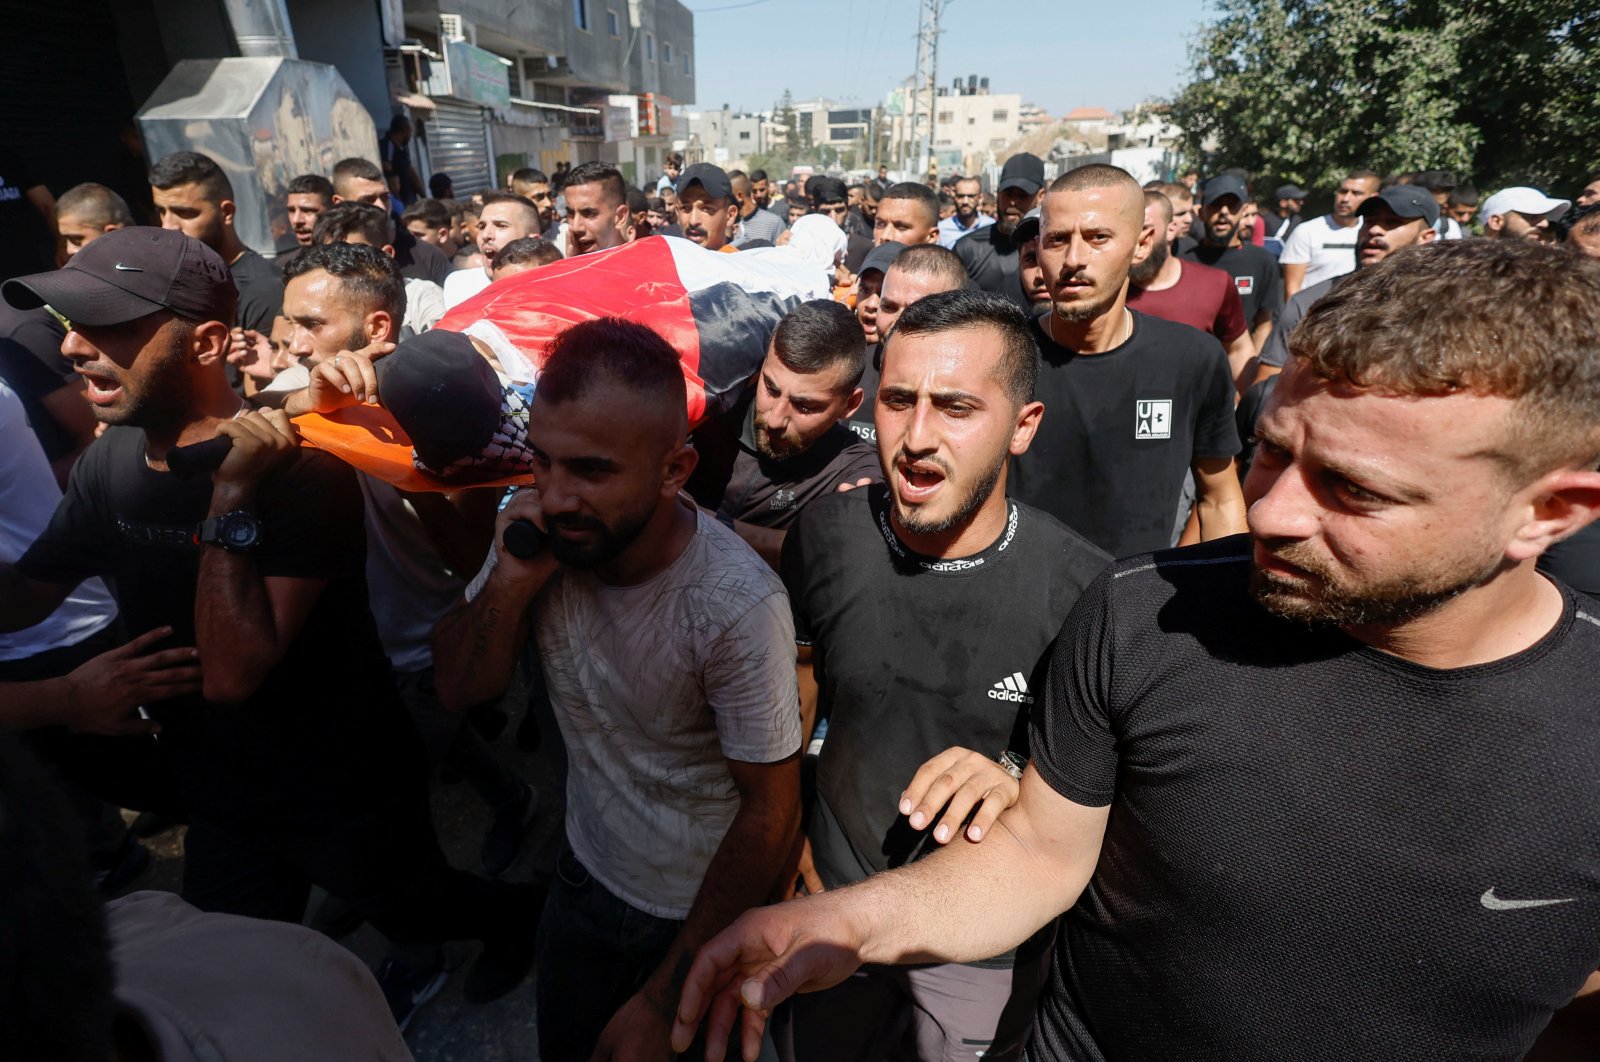 Mourners carry the body of Abdulrahman Khazem, who was killed by Israeli forces in a raid, during his funeral in Jenin, Israeli-occupied West Bank, Sept. 28, 2022. (Reuters Photo)